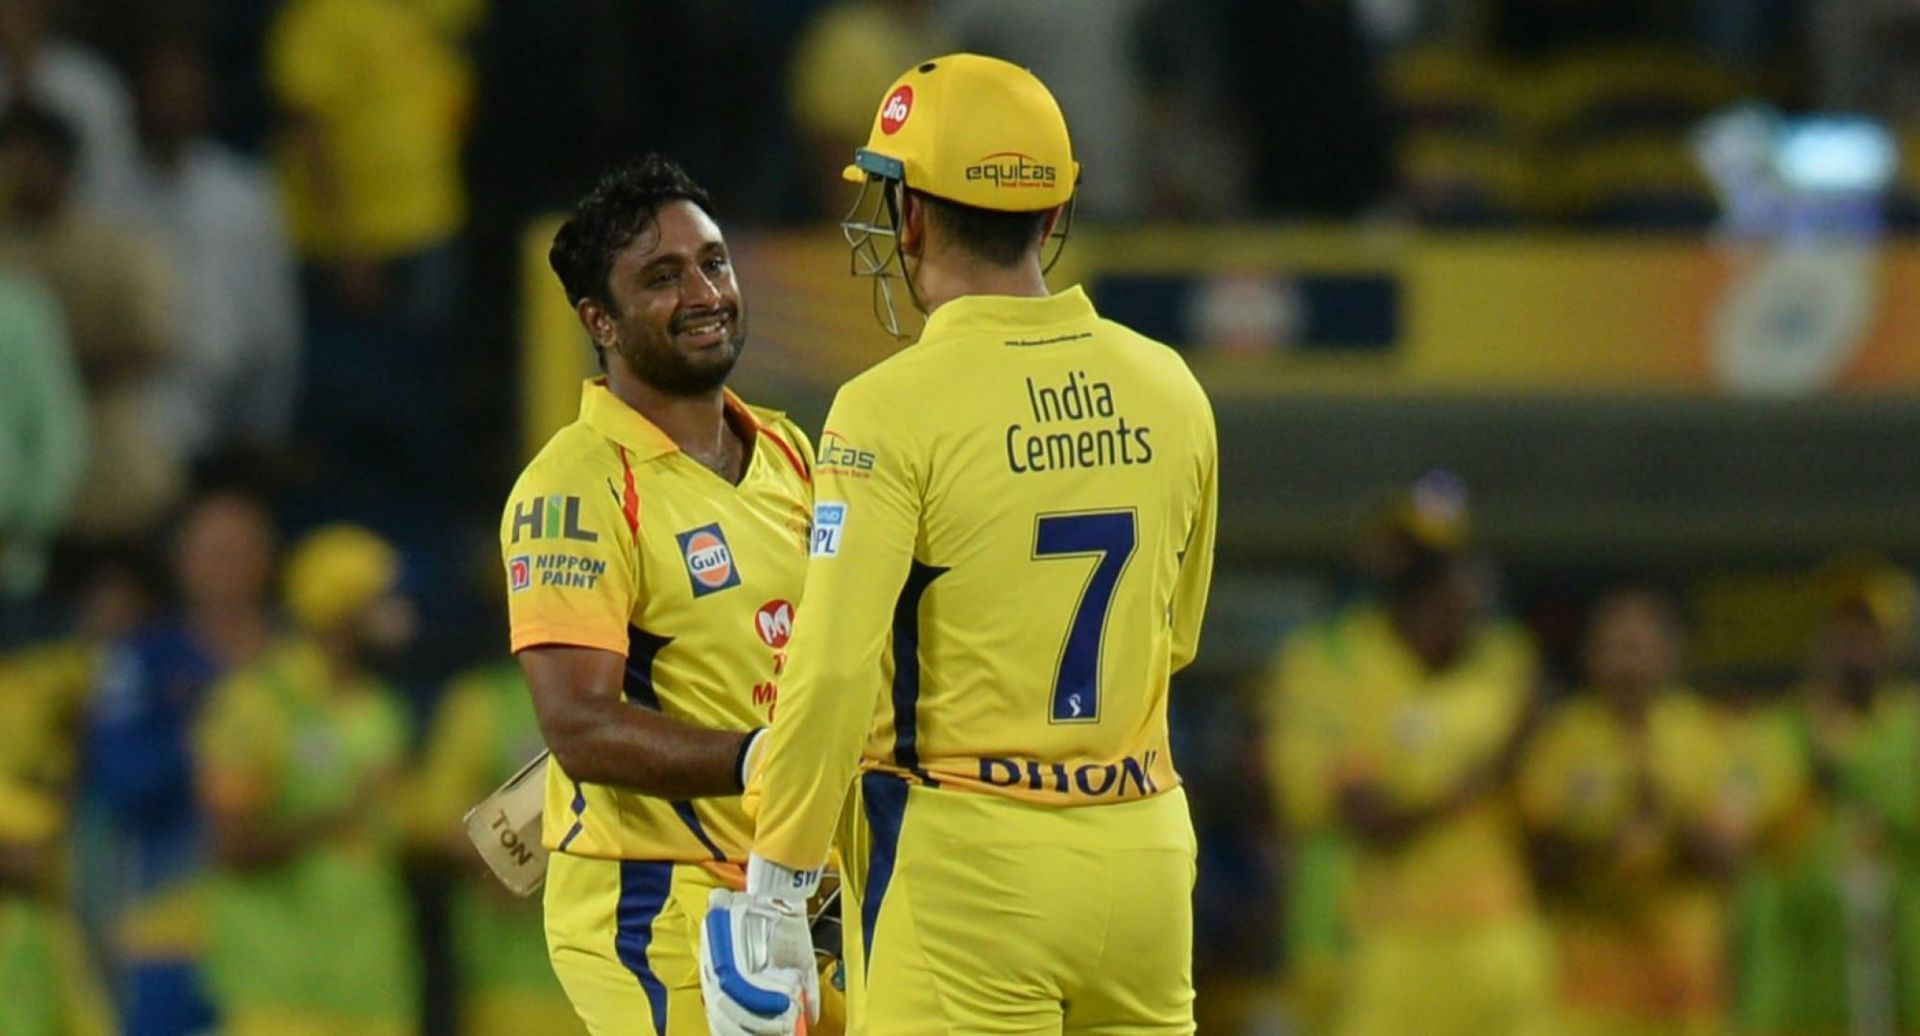 Rayudu has played for CSK under MS Dhoni since 2018